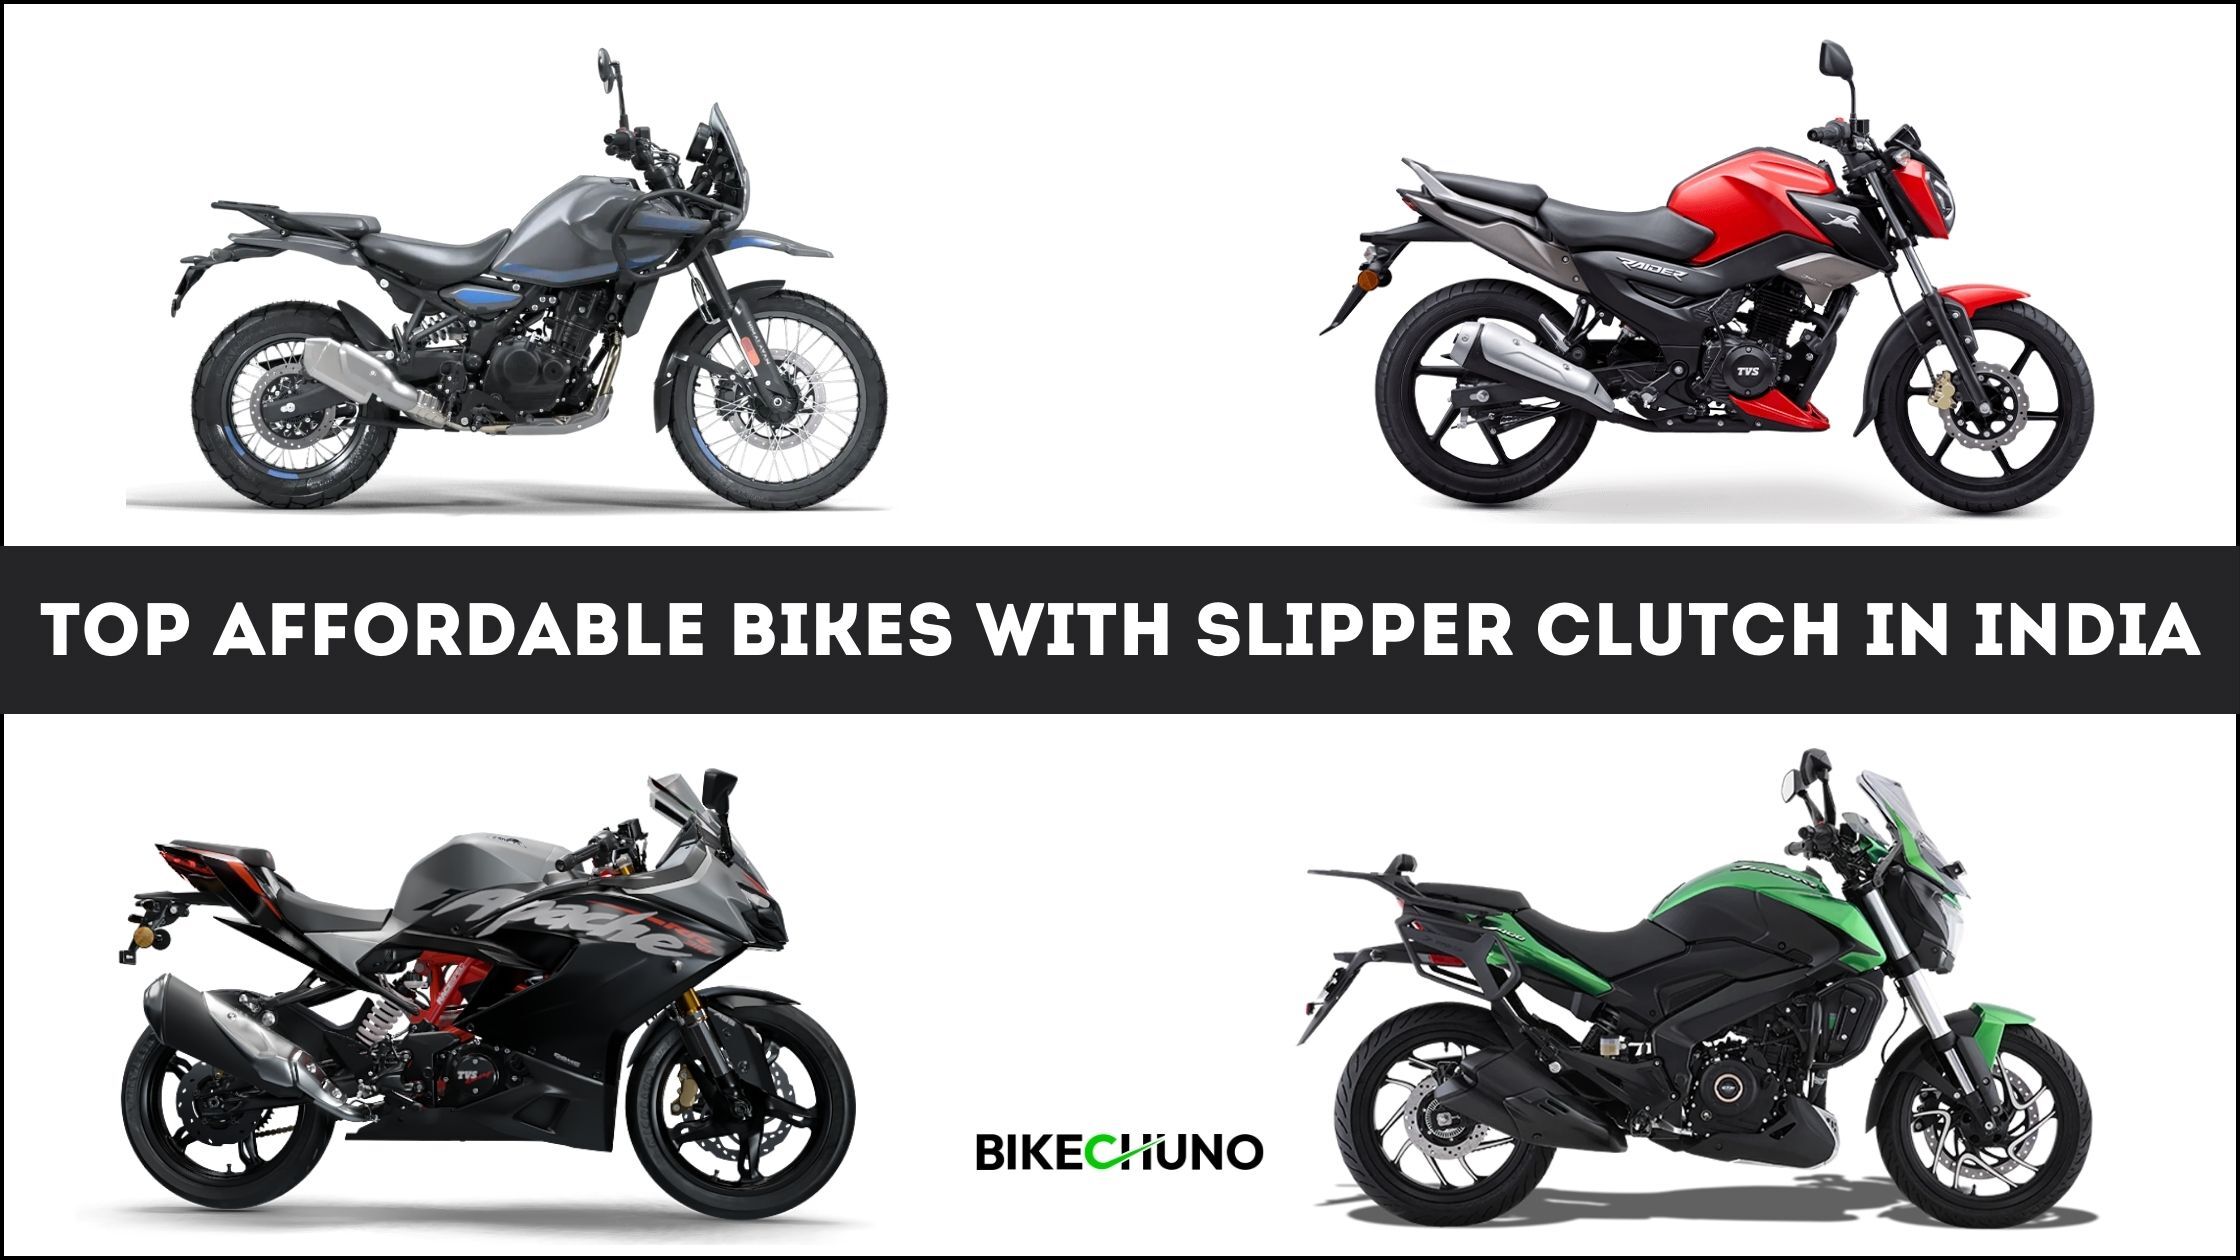 Top 10 Affordable Bikes With Slipper Clutch in India